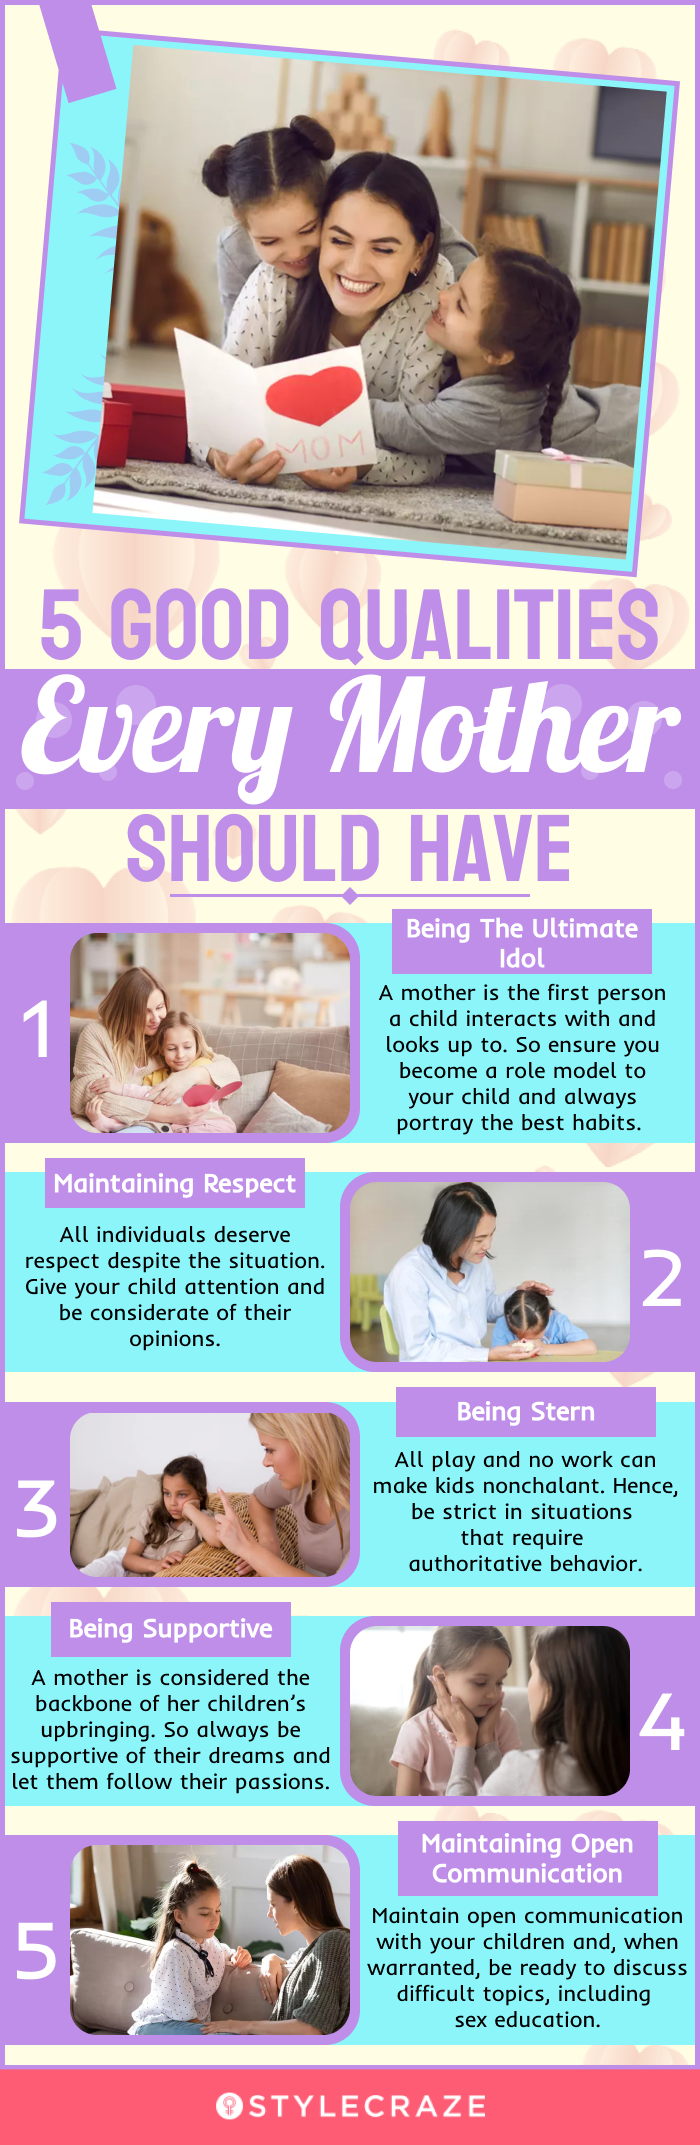 5 good qualities every mother should have (infographic)